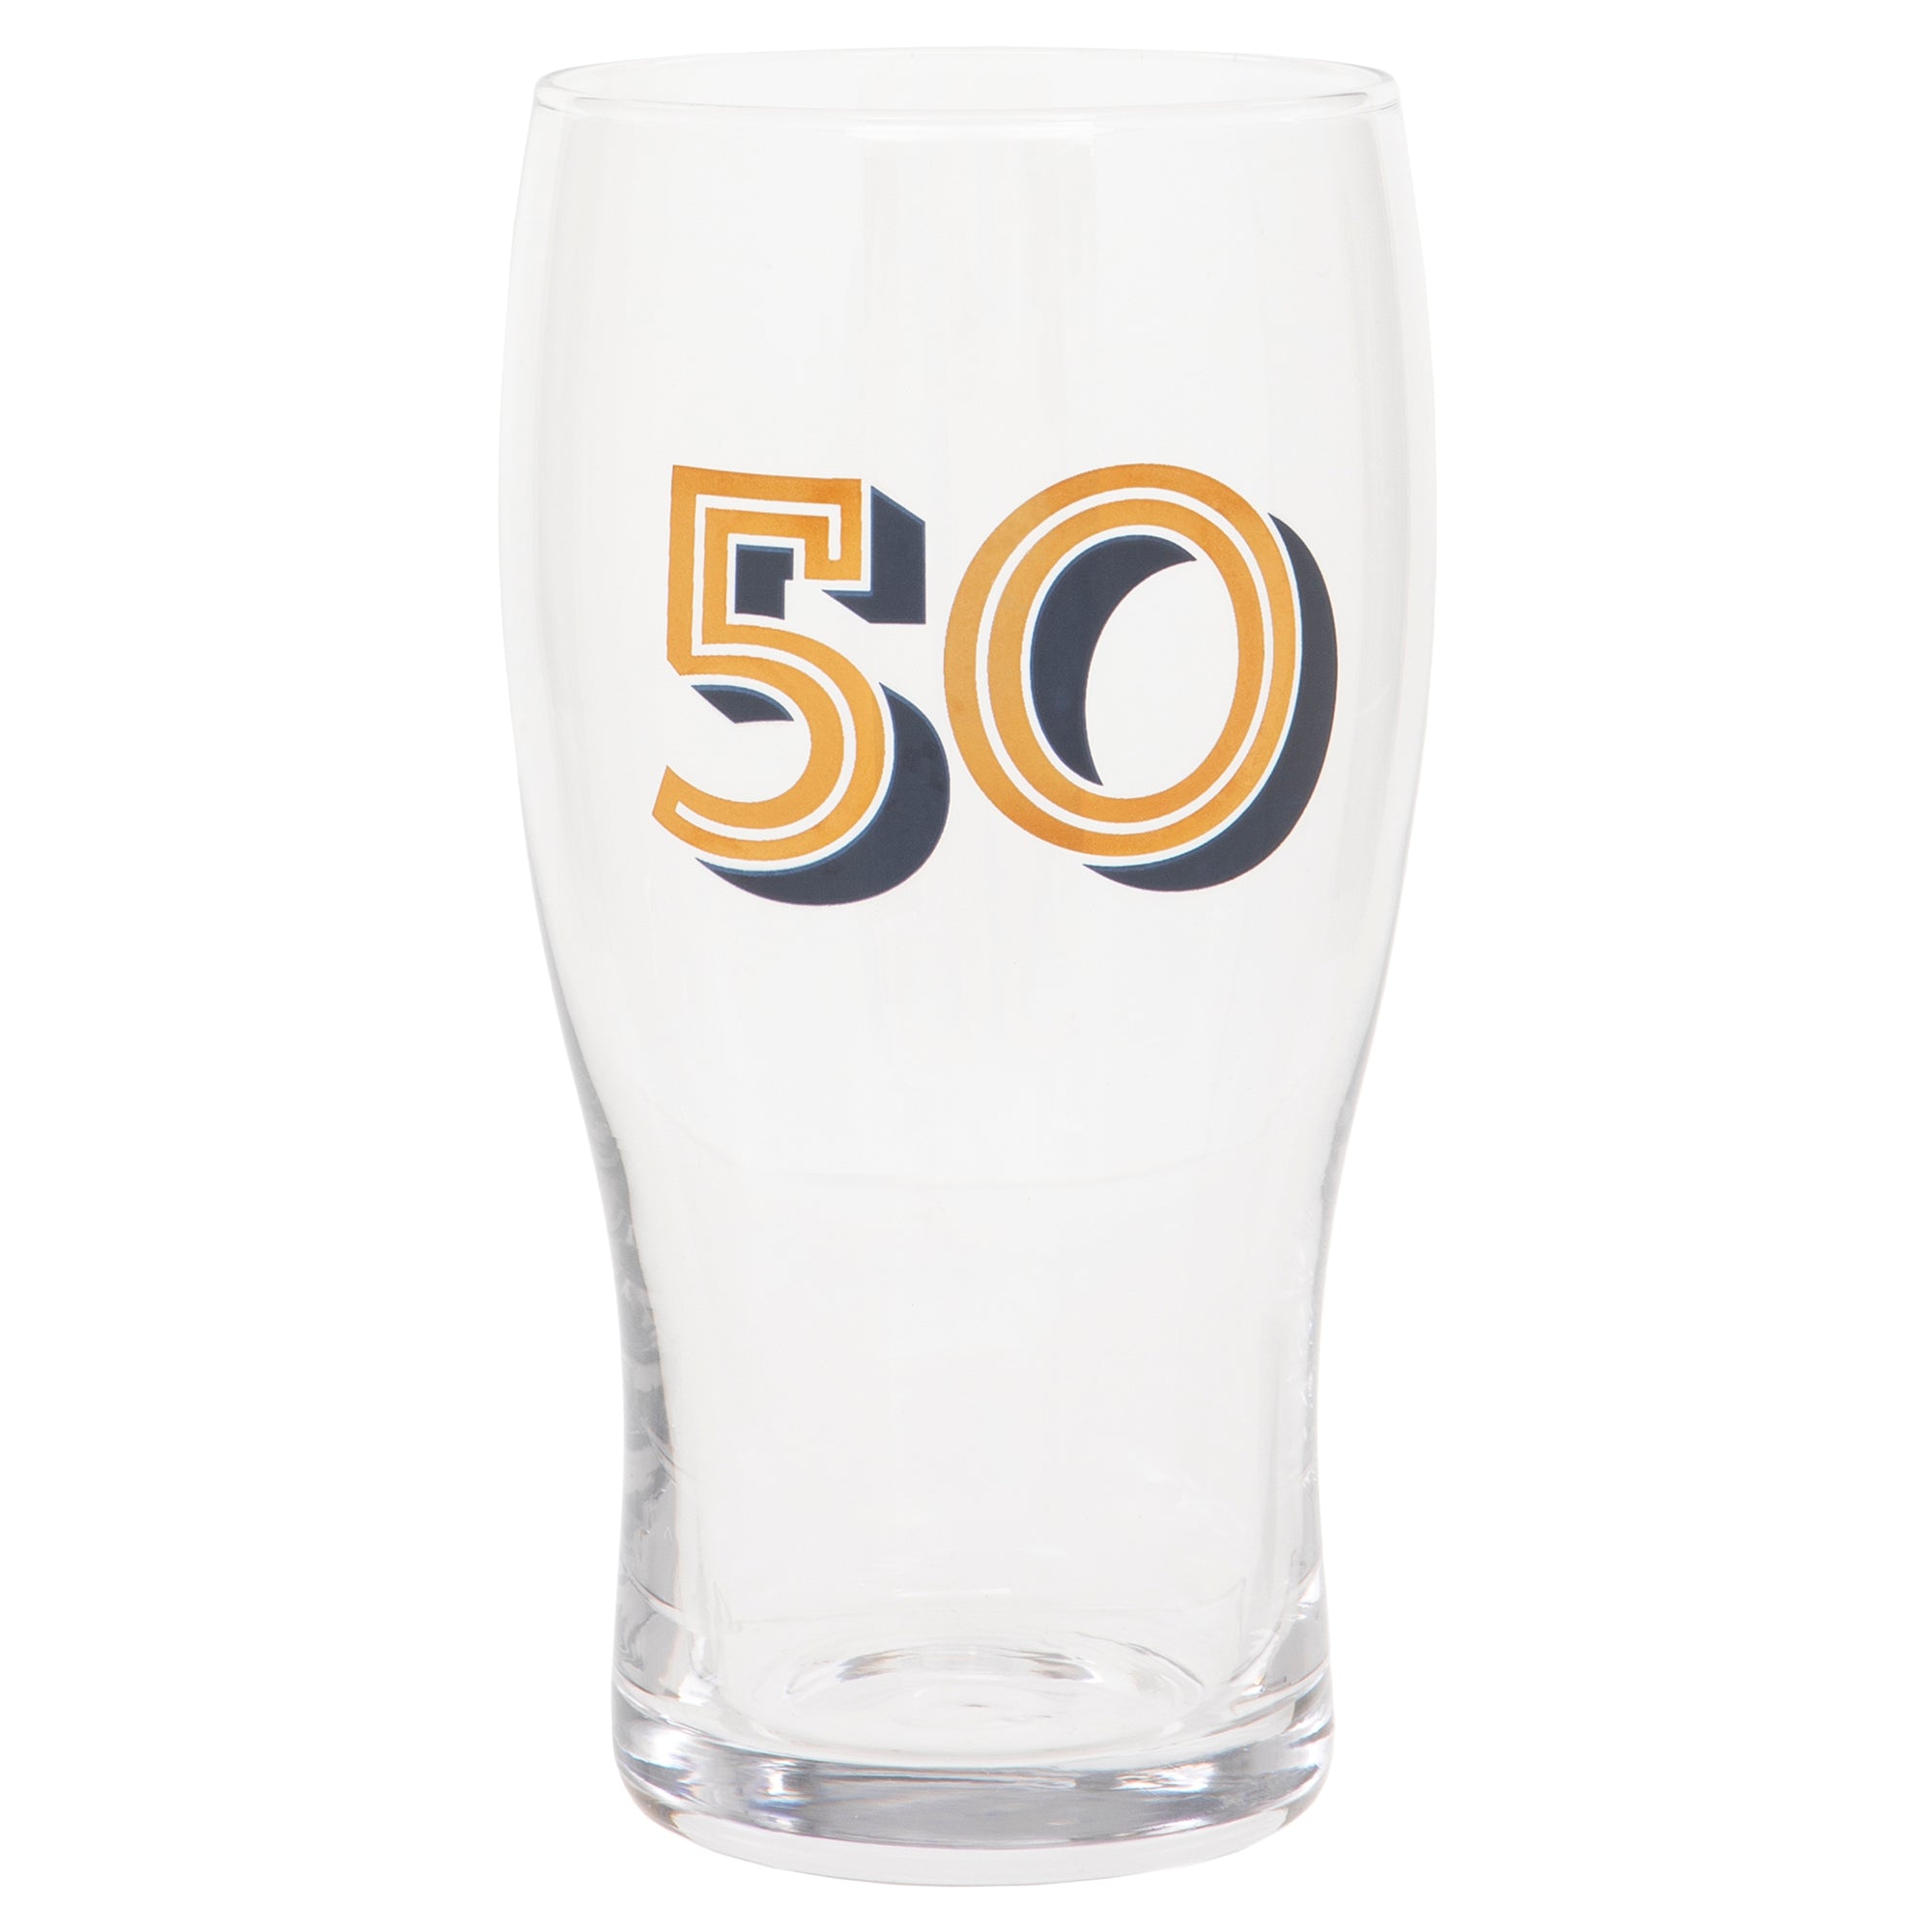 Gold Collection 50th Birthday Beer Pint Glass